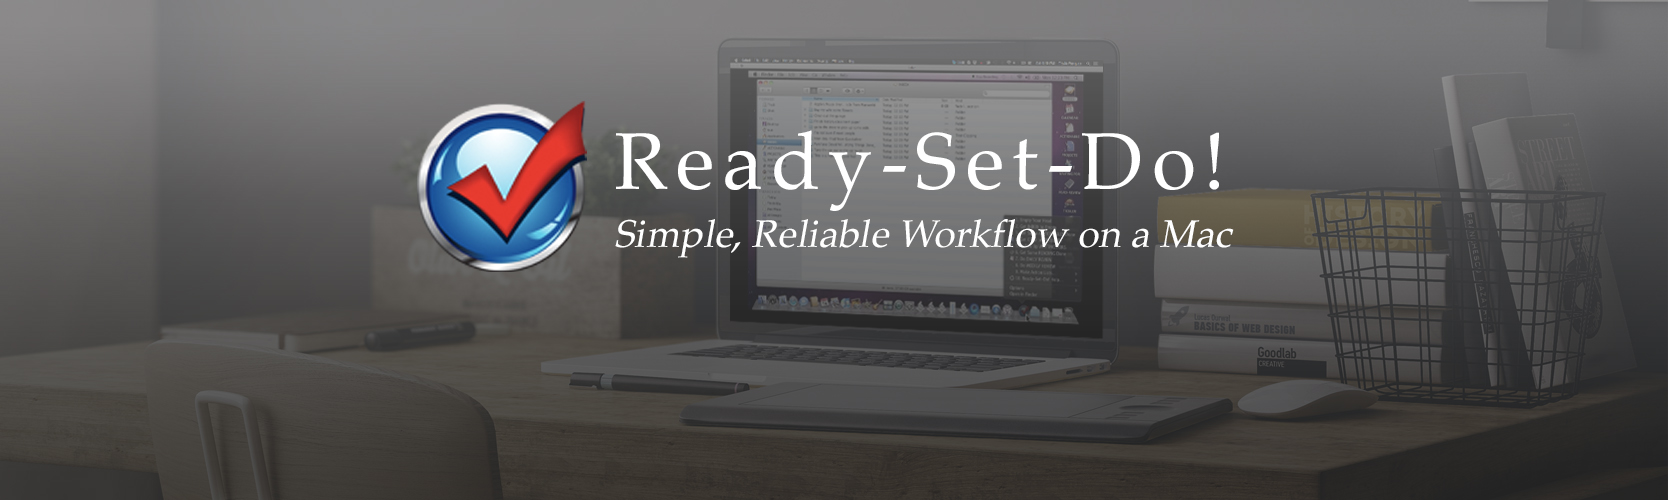 Ready-Set-Do! | Simple, Reliable Workflow on a Mac